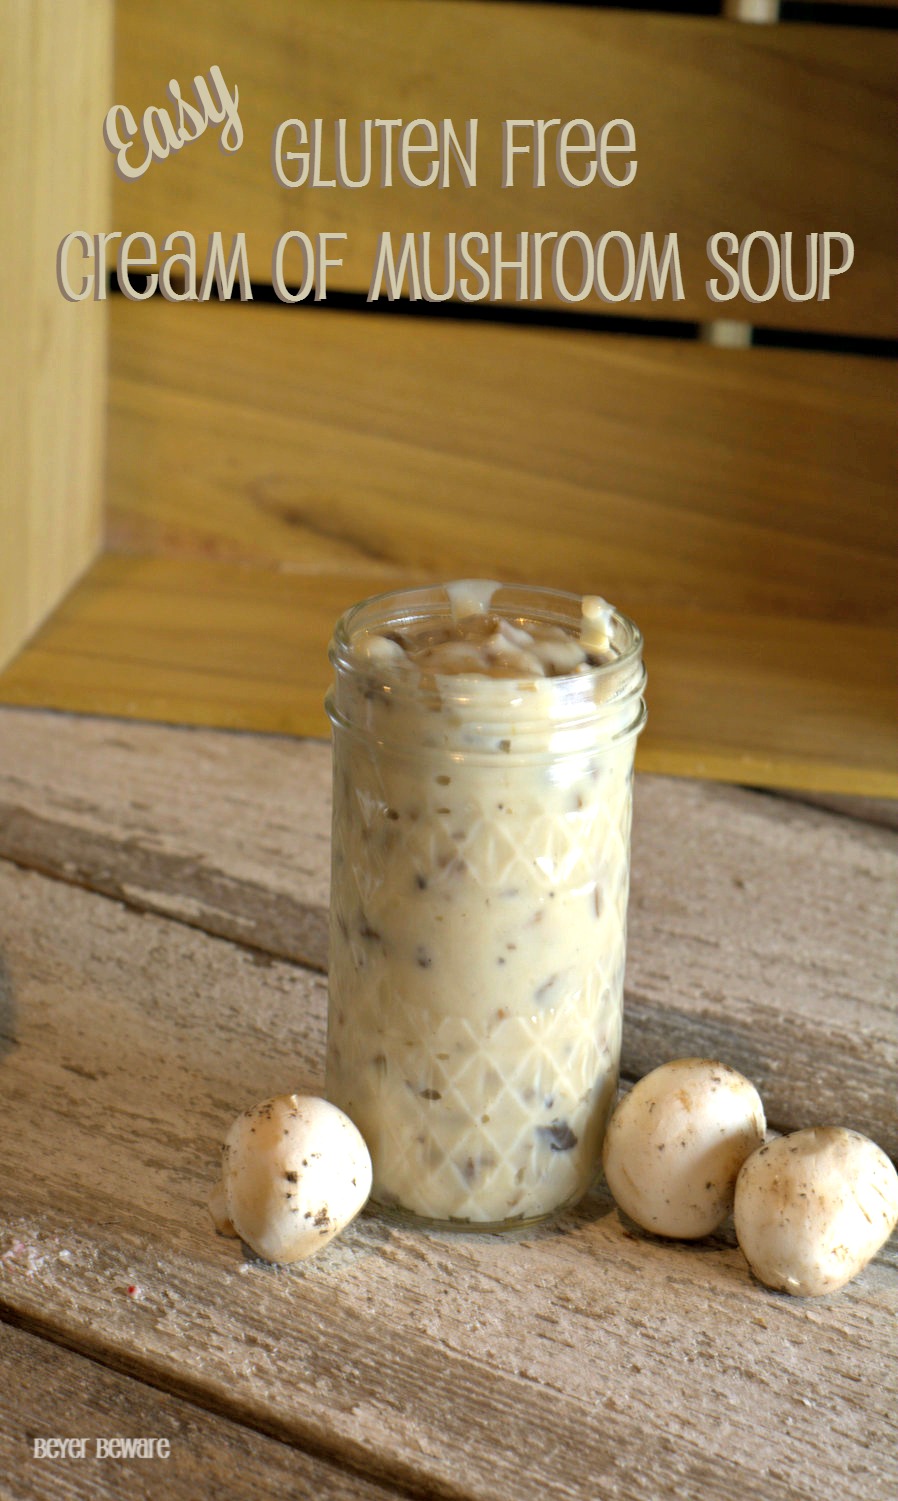 This easy Gluten Free Cream of Mushroom Soup recipe is now a staple in my cooking for any recipe that calls for cream of mushroom soup.